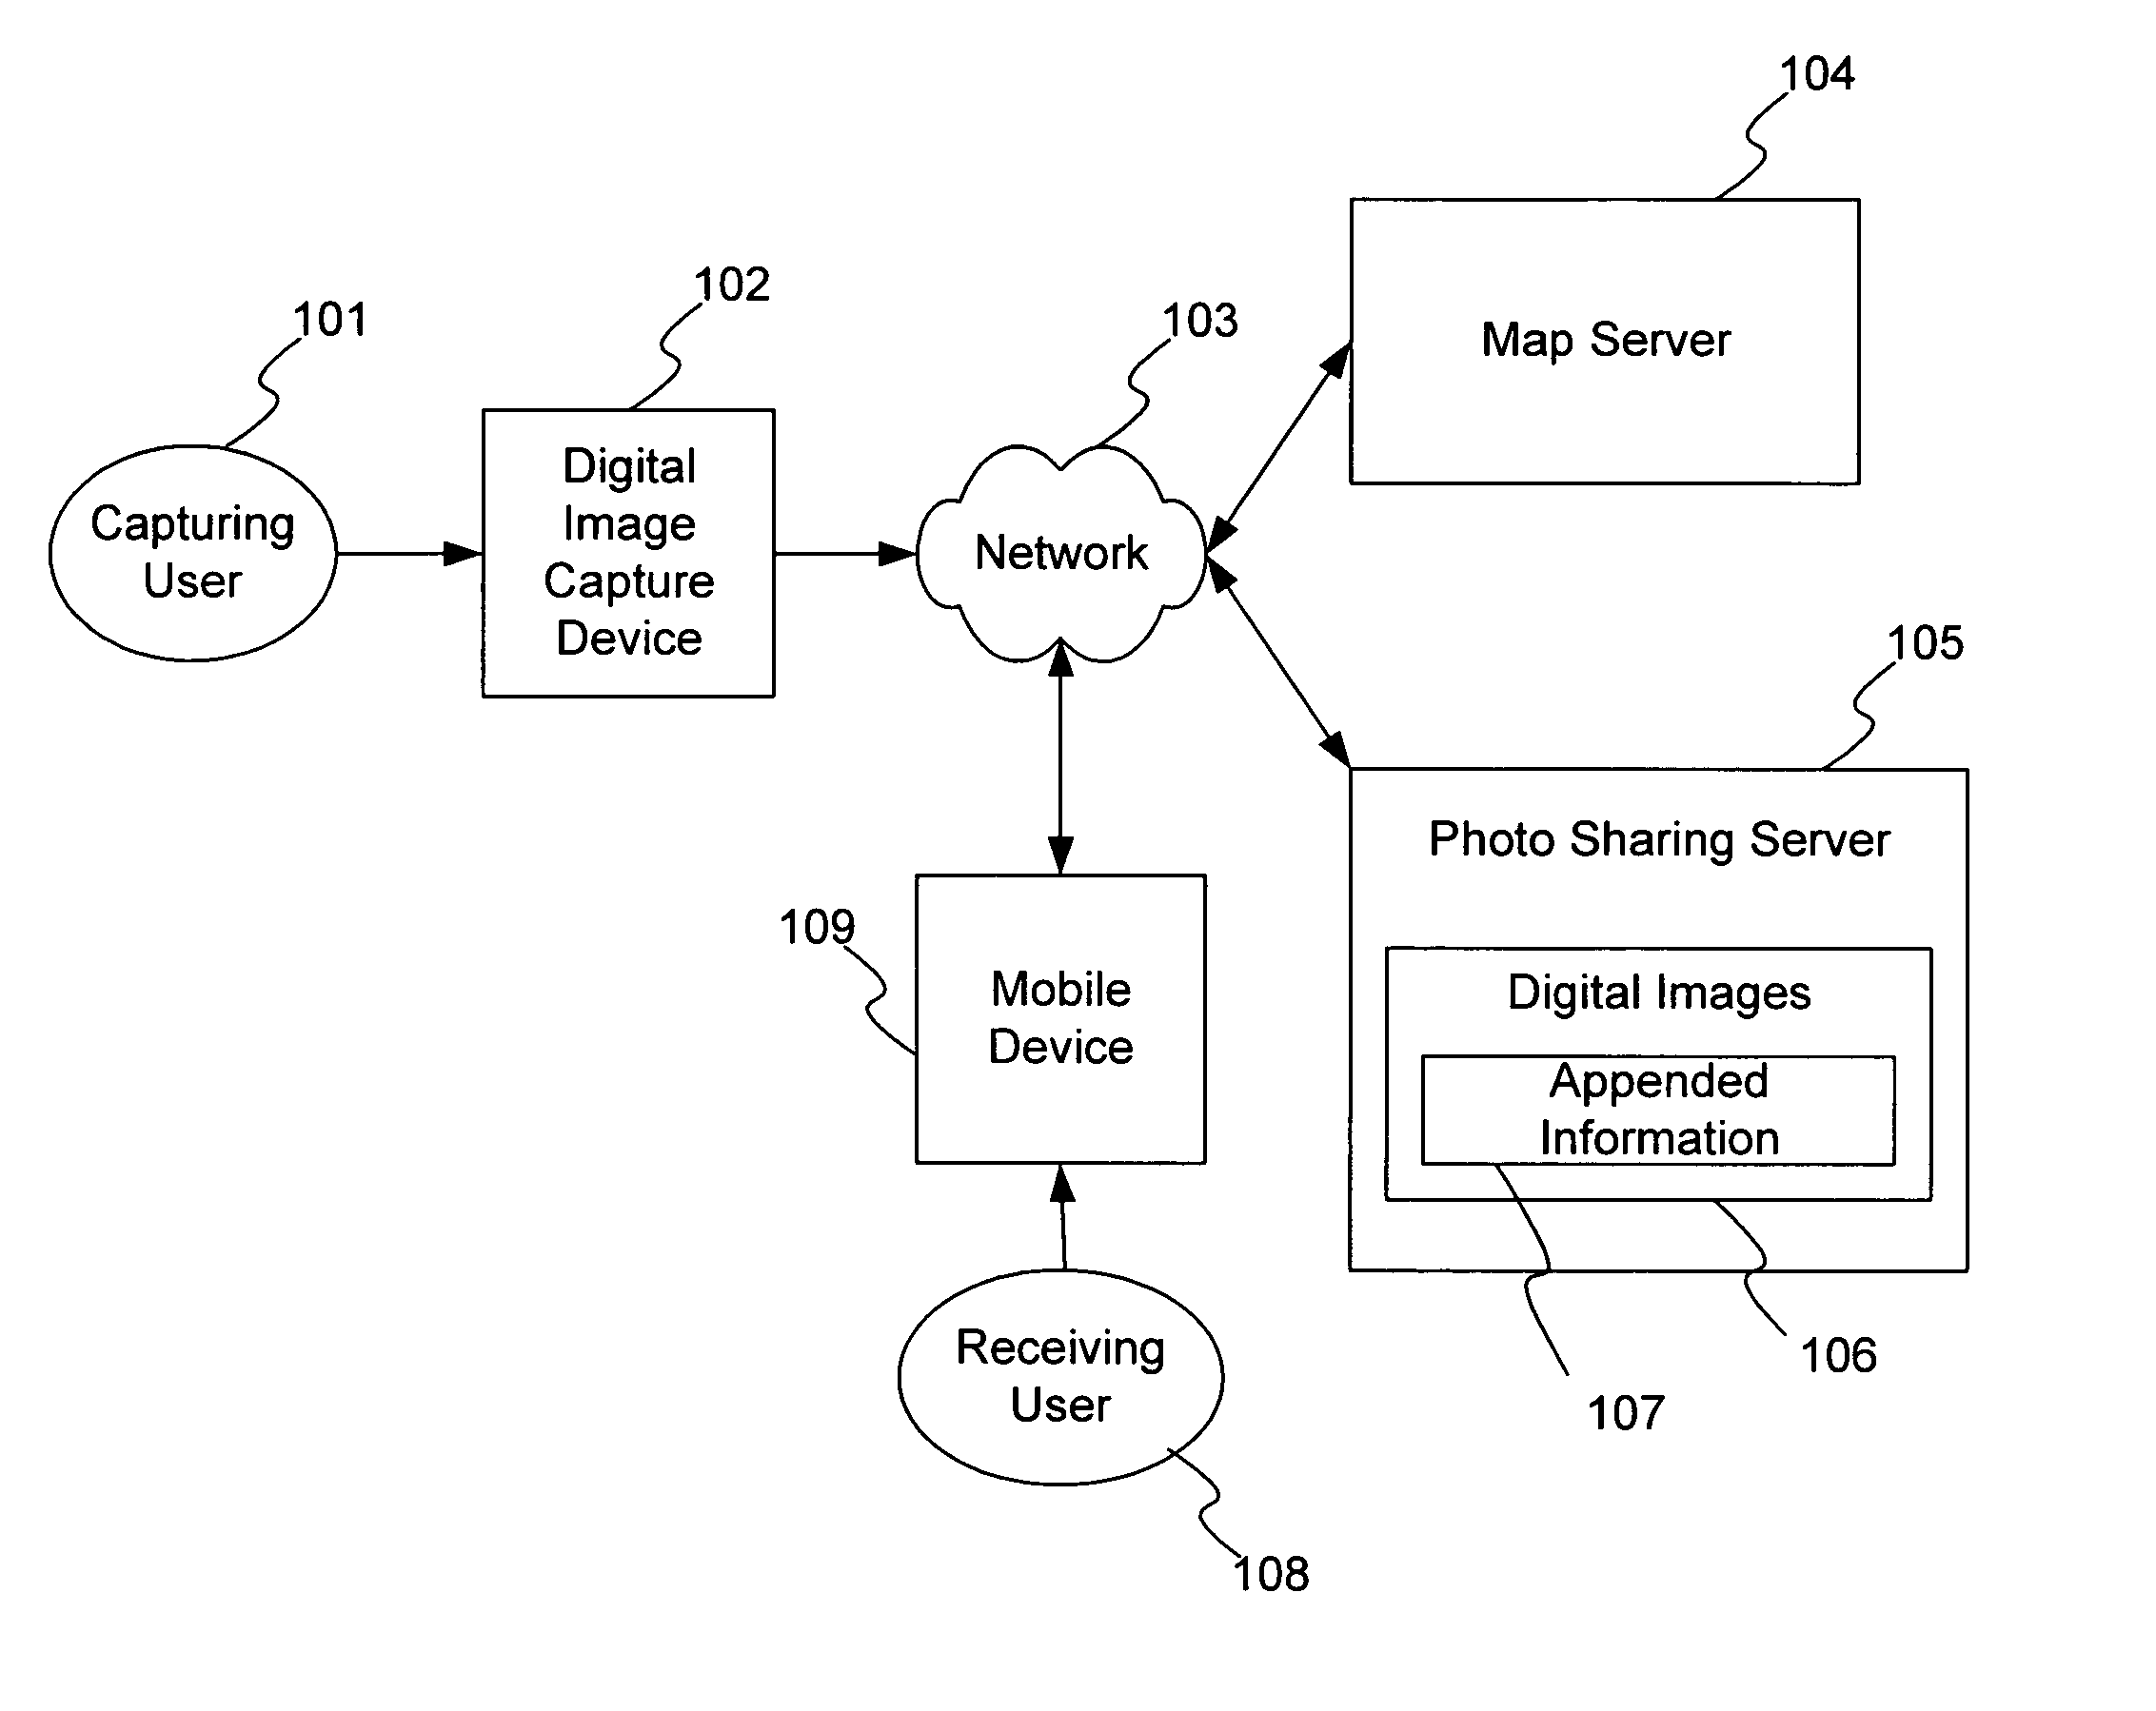 Method for providing recommendations using image, location data, and annotations